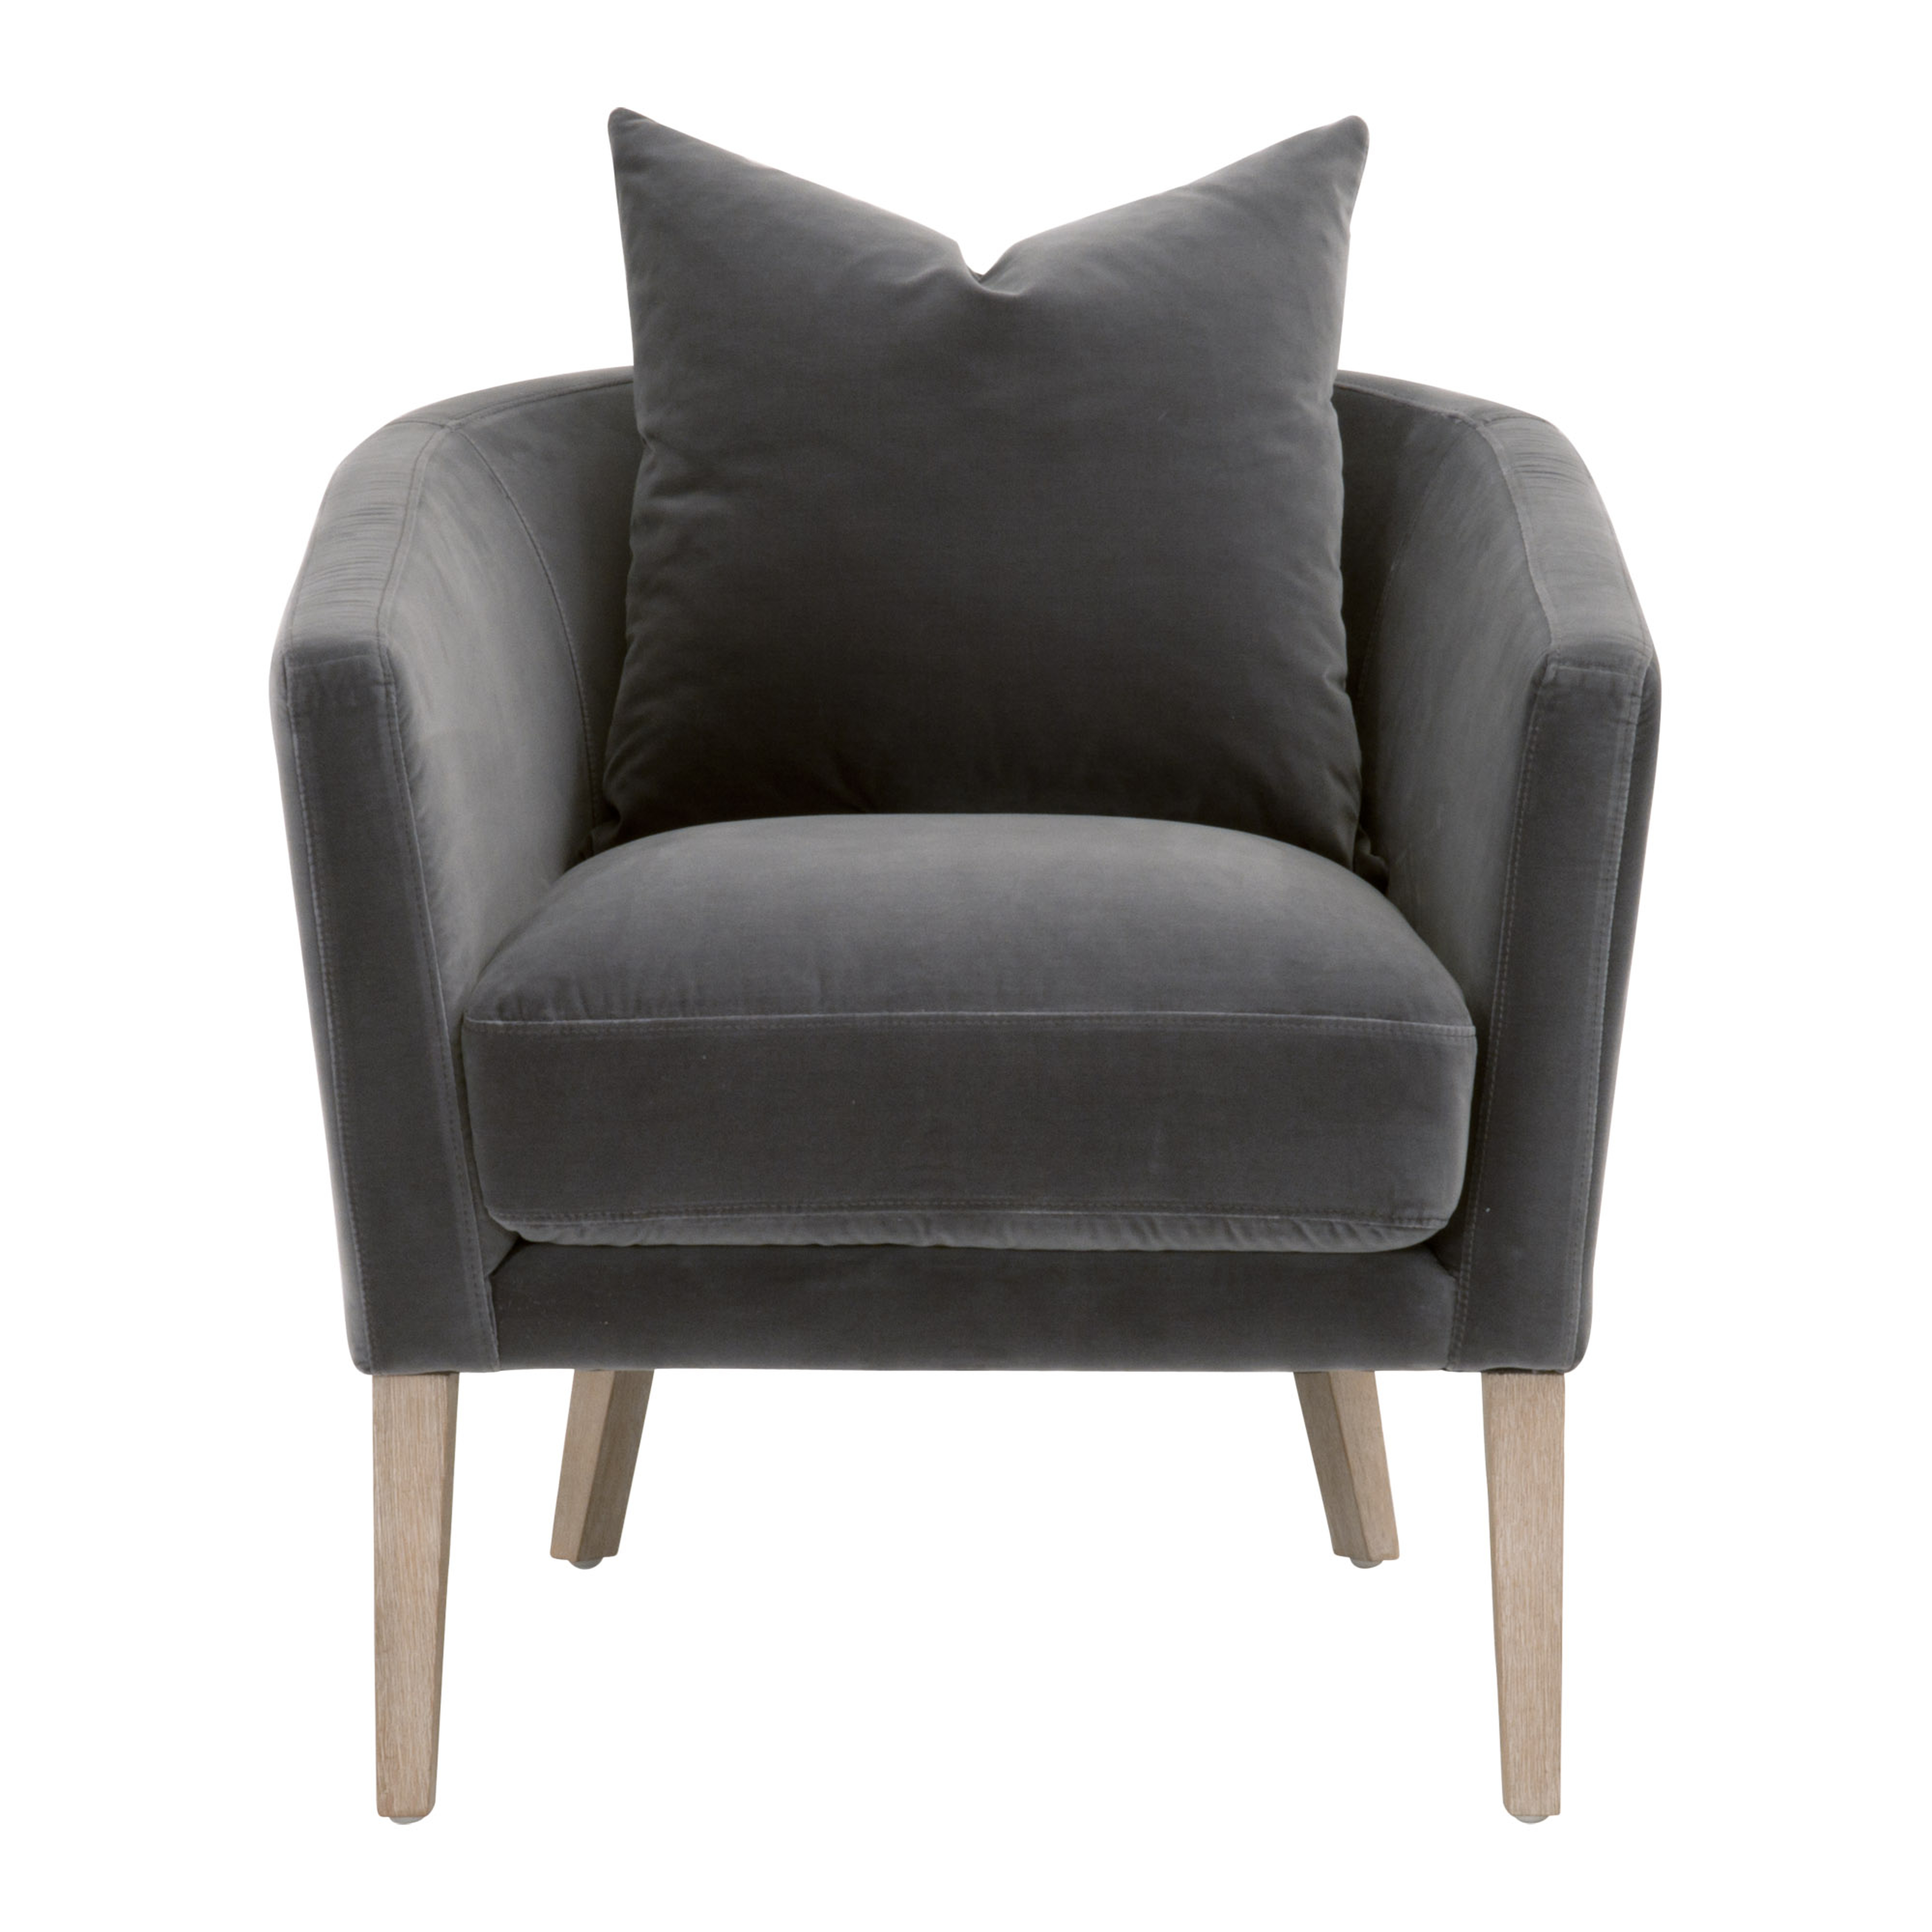 Indra Club Chair, Charcoal - Cove Goods